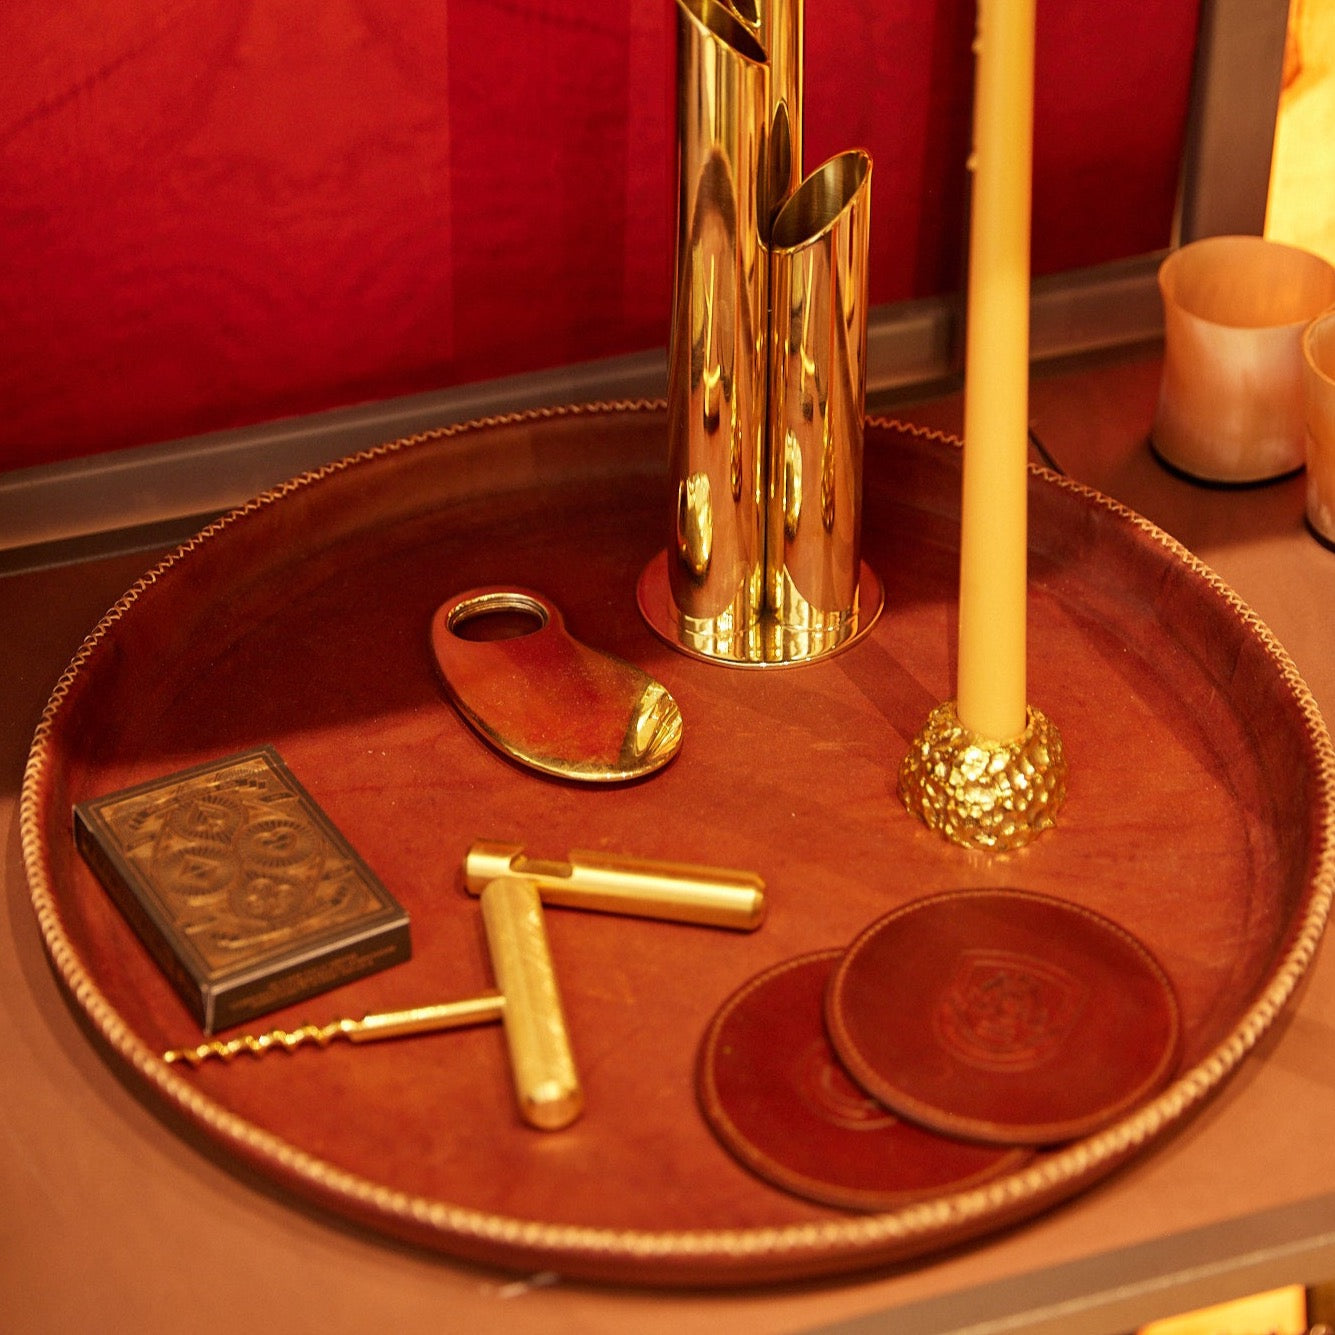 Large Brown Leather Tray with Hand Stitched Detailing Holding our Brass Home Decor Vase and Candleholder Along With A Deck of Cards and Bottle Openers. 